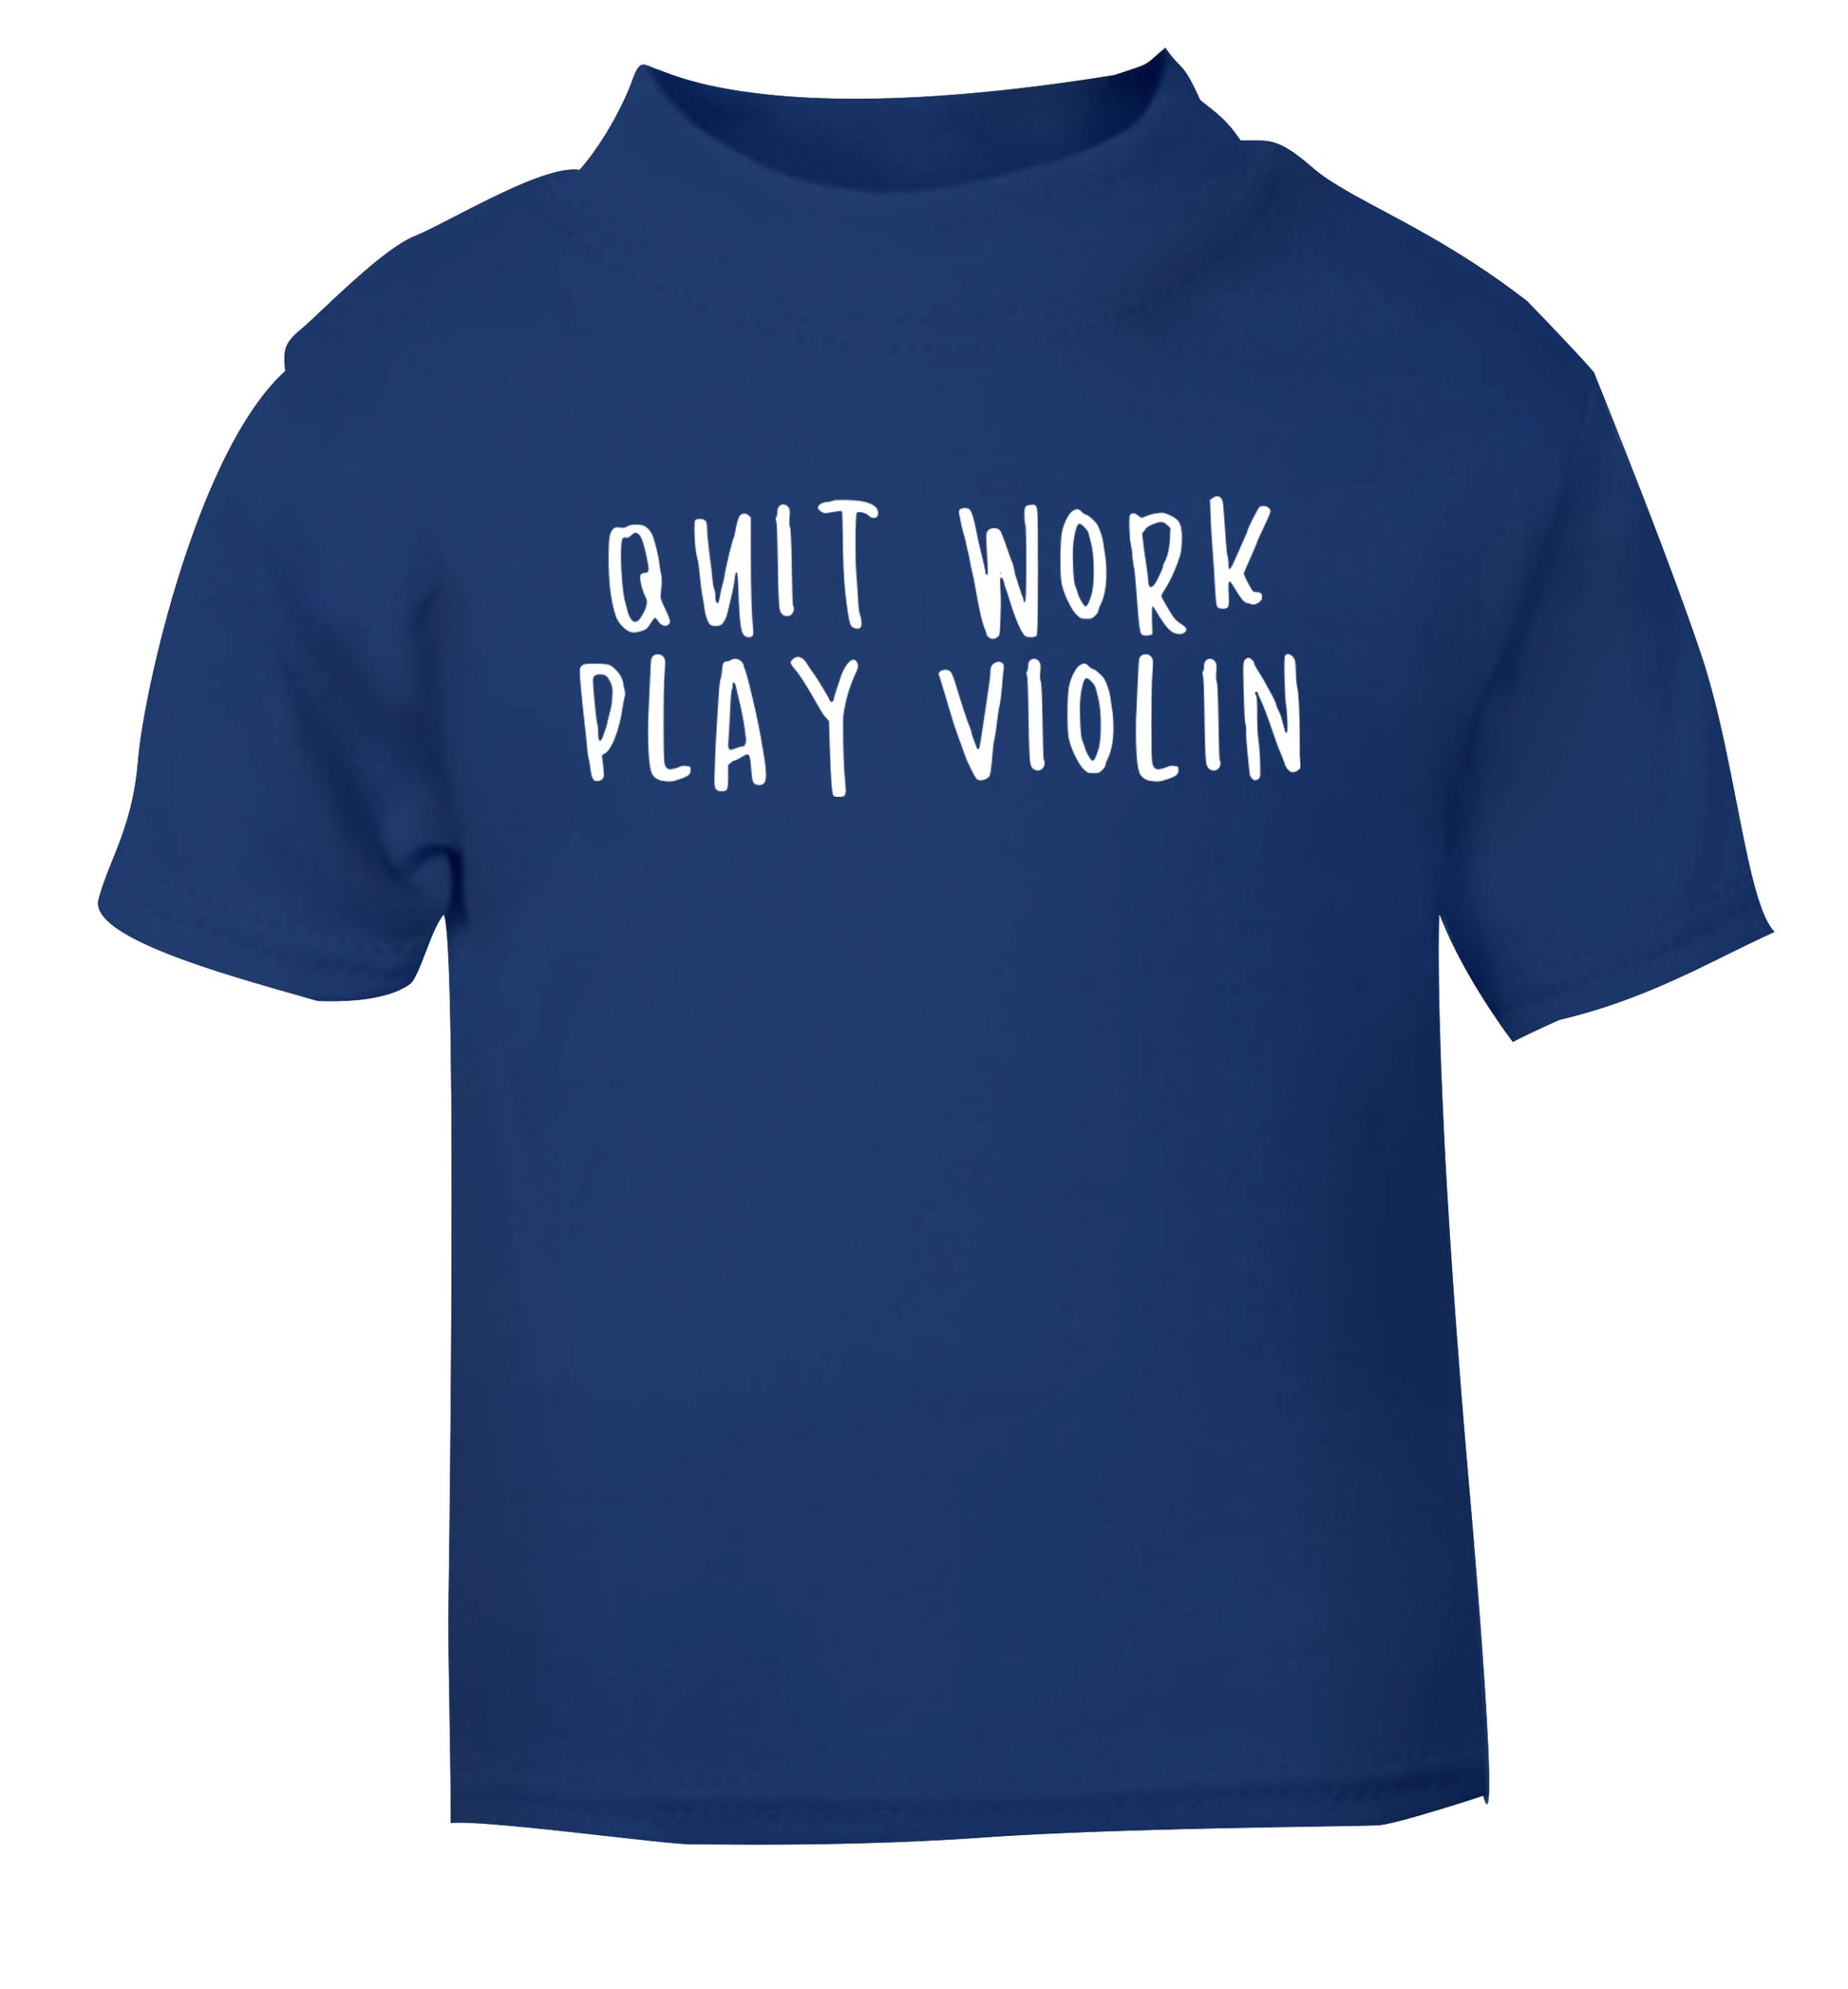 Quit work play violin blue Baby Toddler Tshirt 2 Years